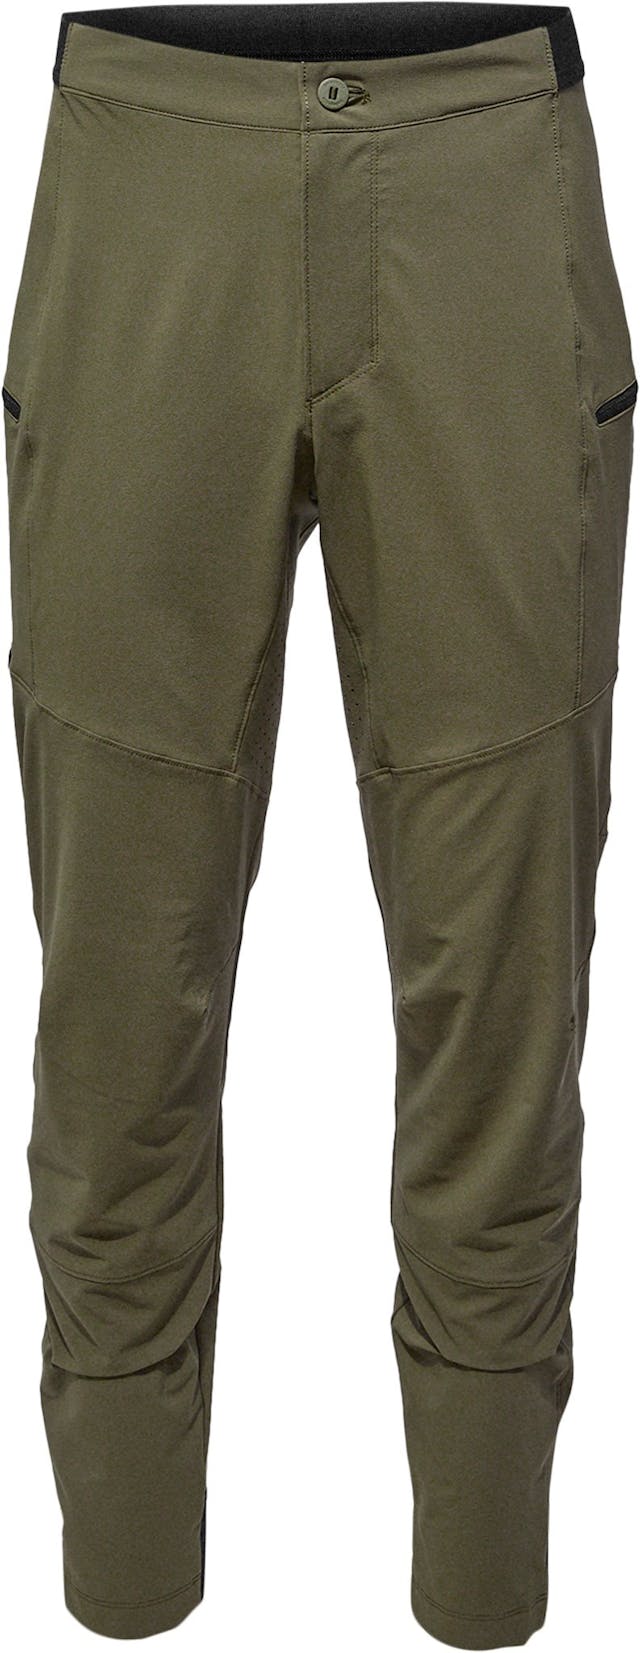 Product image for Dirt Craft Pants - Men's